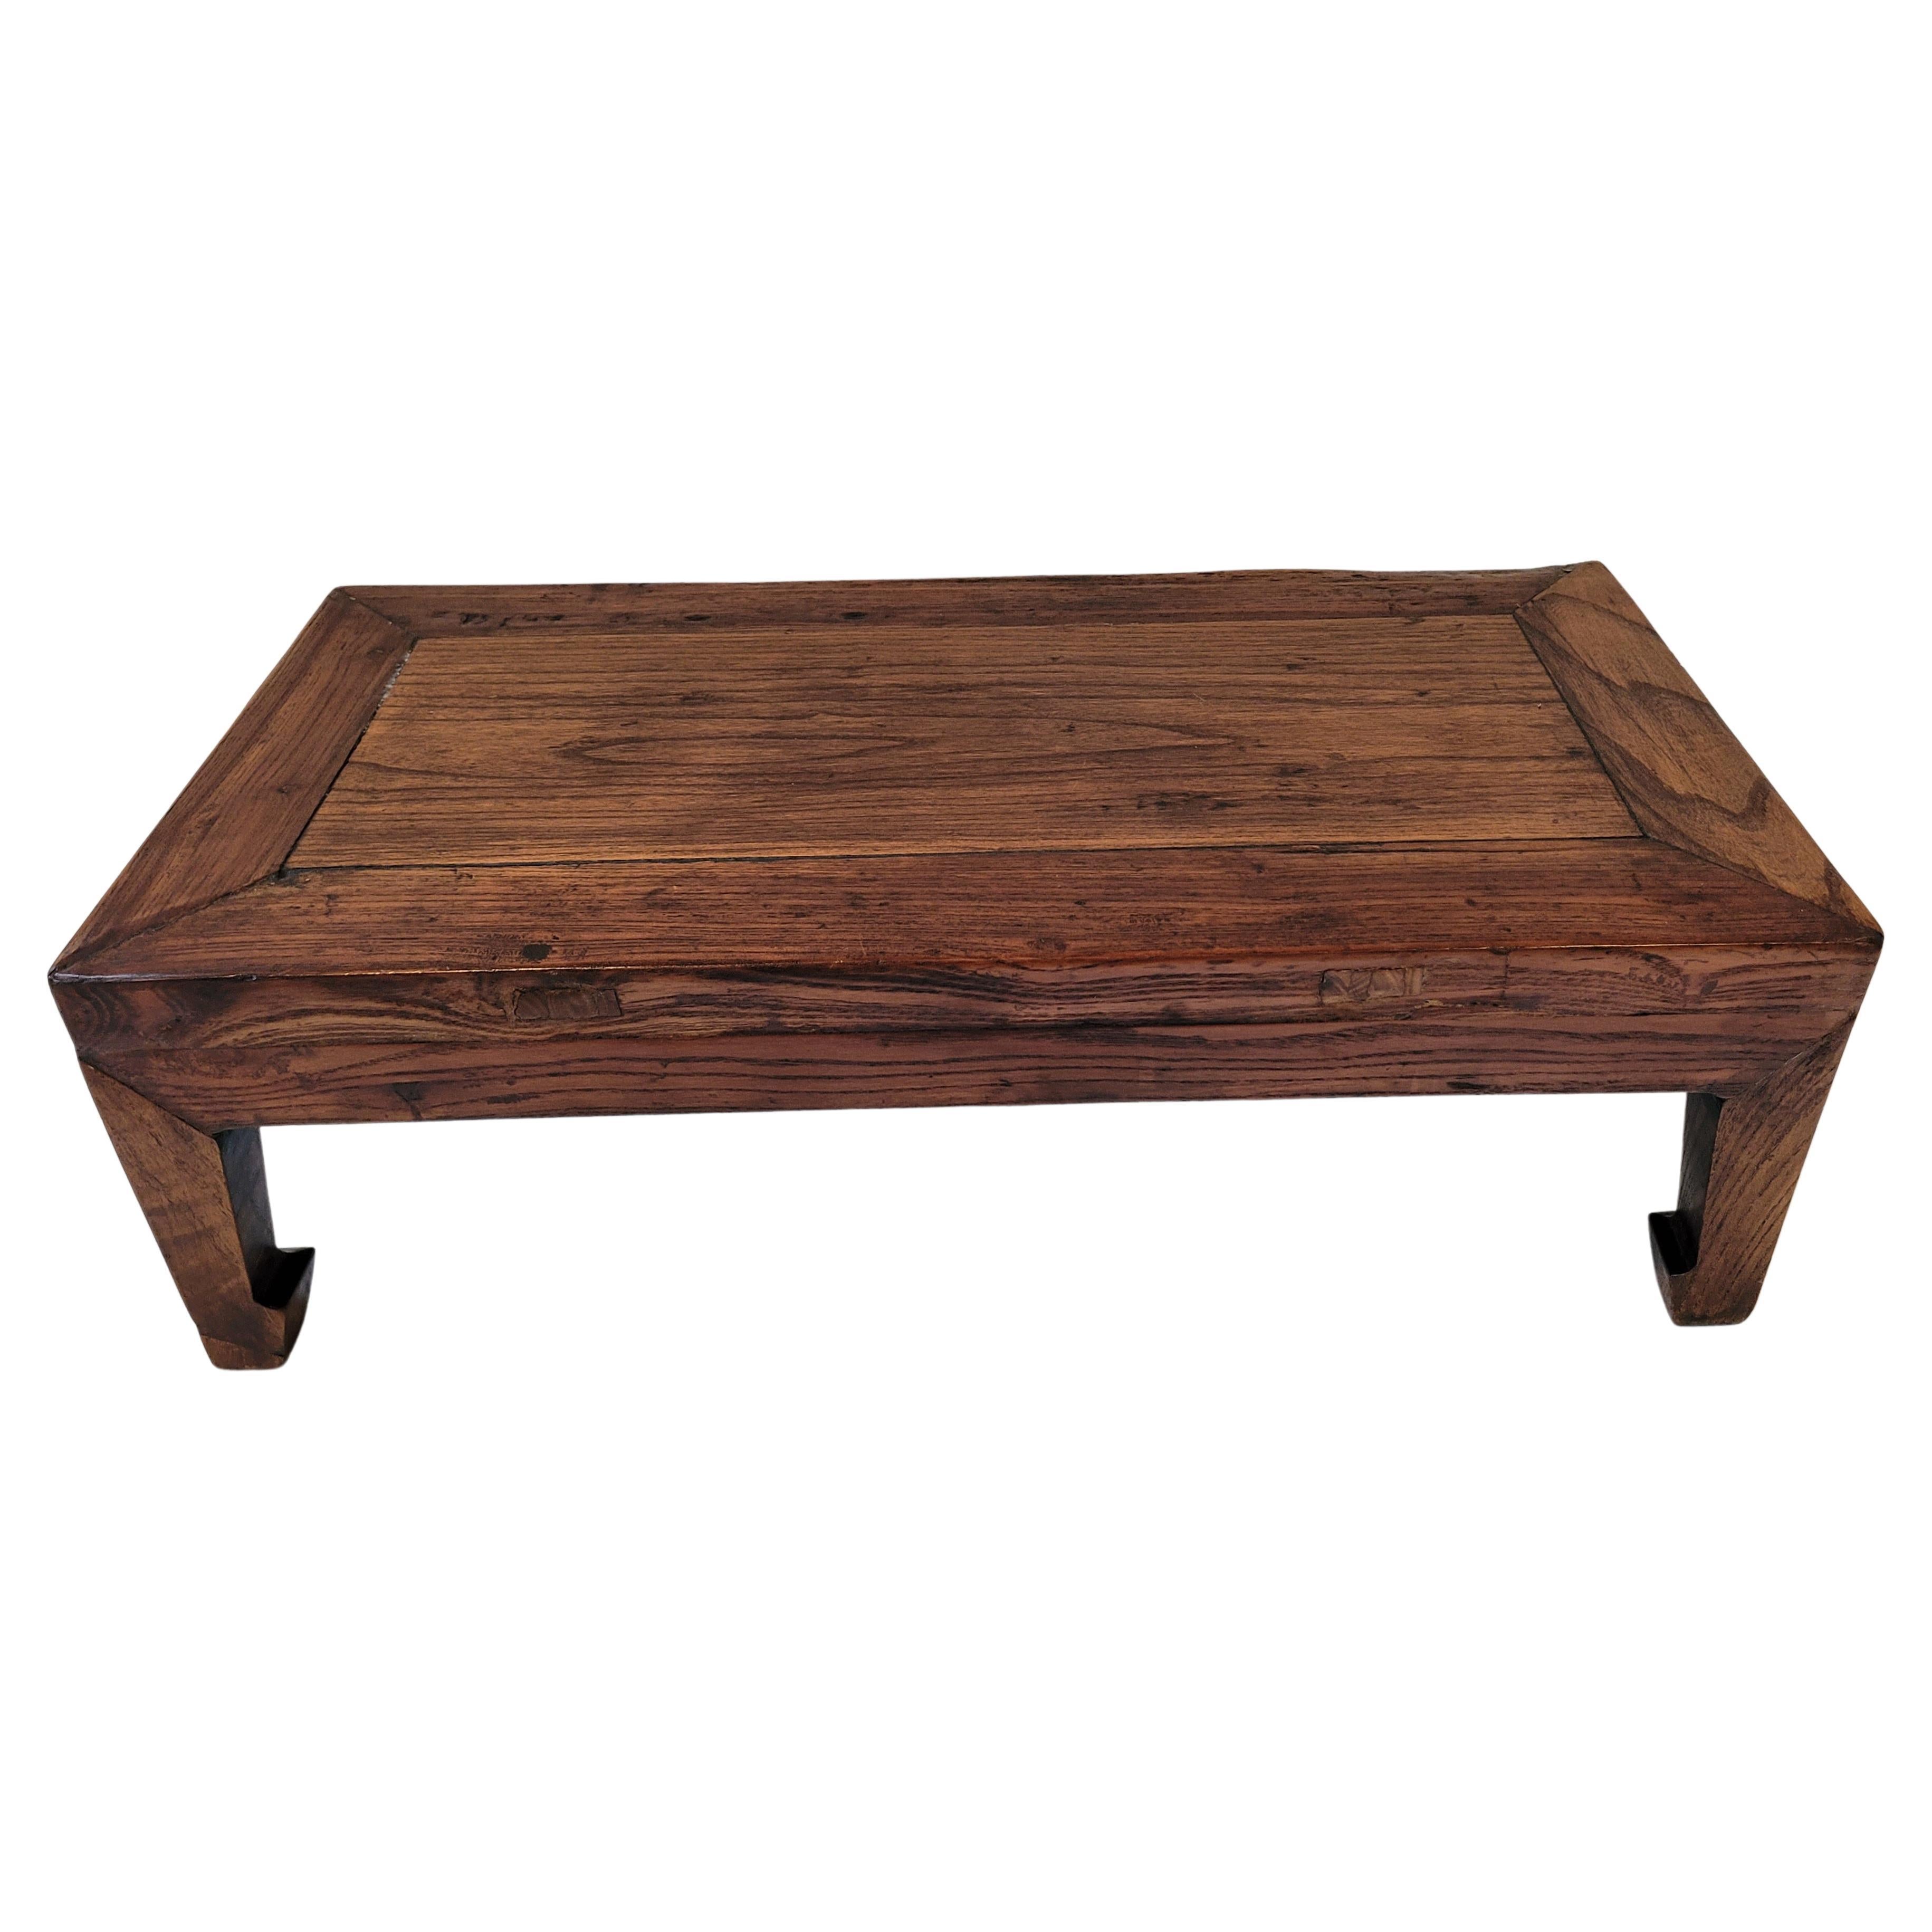 Small Rectangular Kang Table, 19th Century For Sale